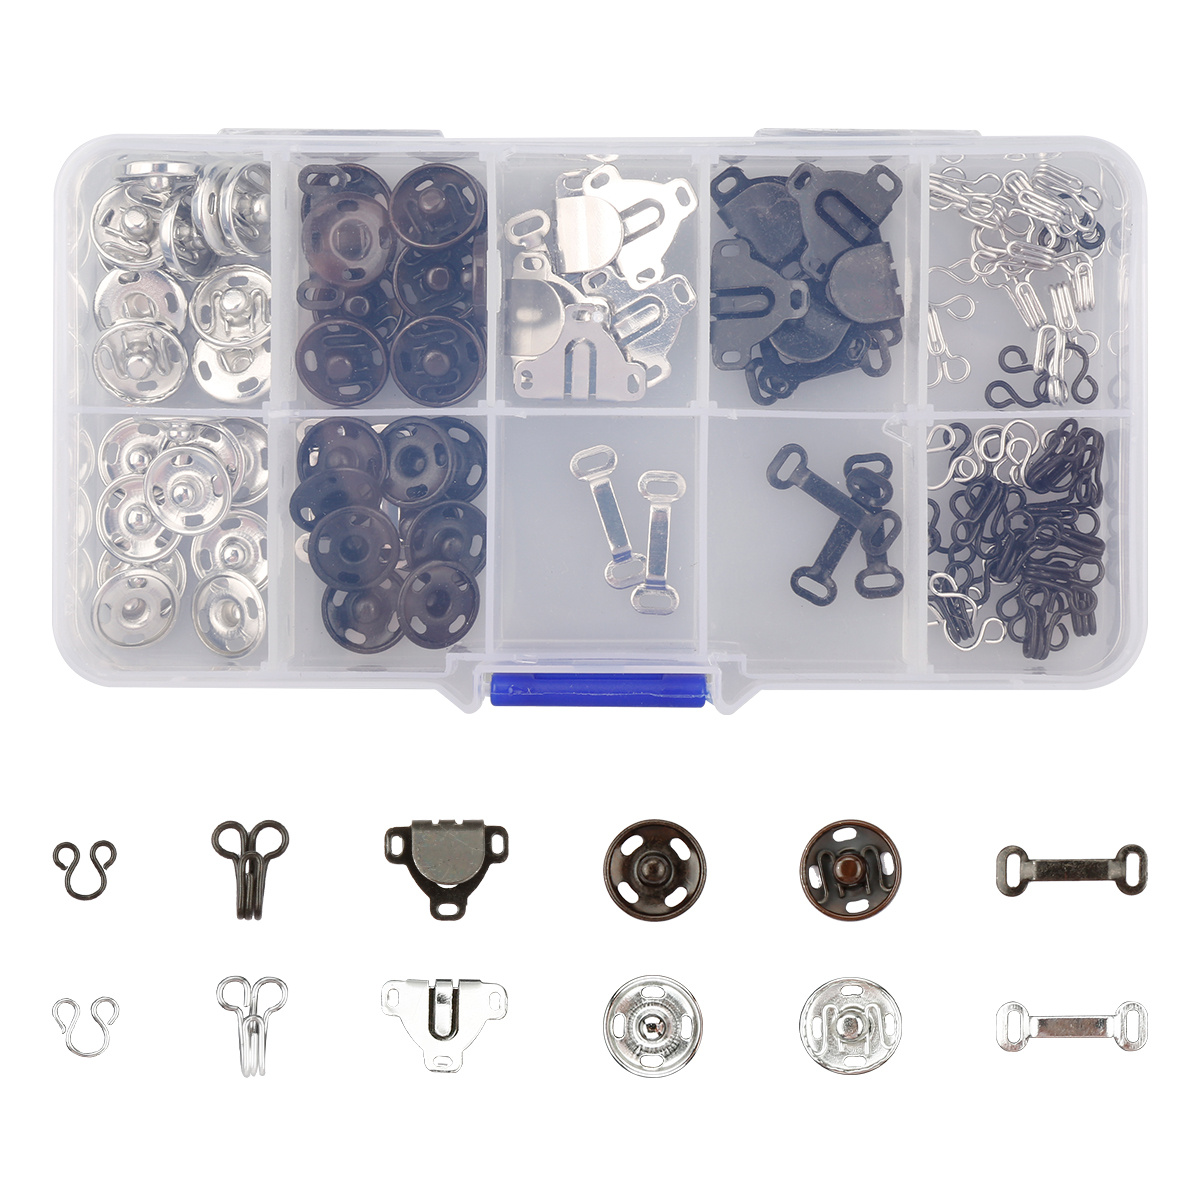 50pcs Sewing Snaps And Hooks Set Skirt Hooks Sew On Snaps Hook Eye Latches Diy  Sewing Craft Fastener Kit, Shop The Latest Trends